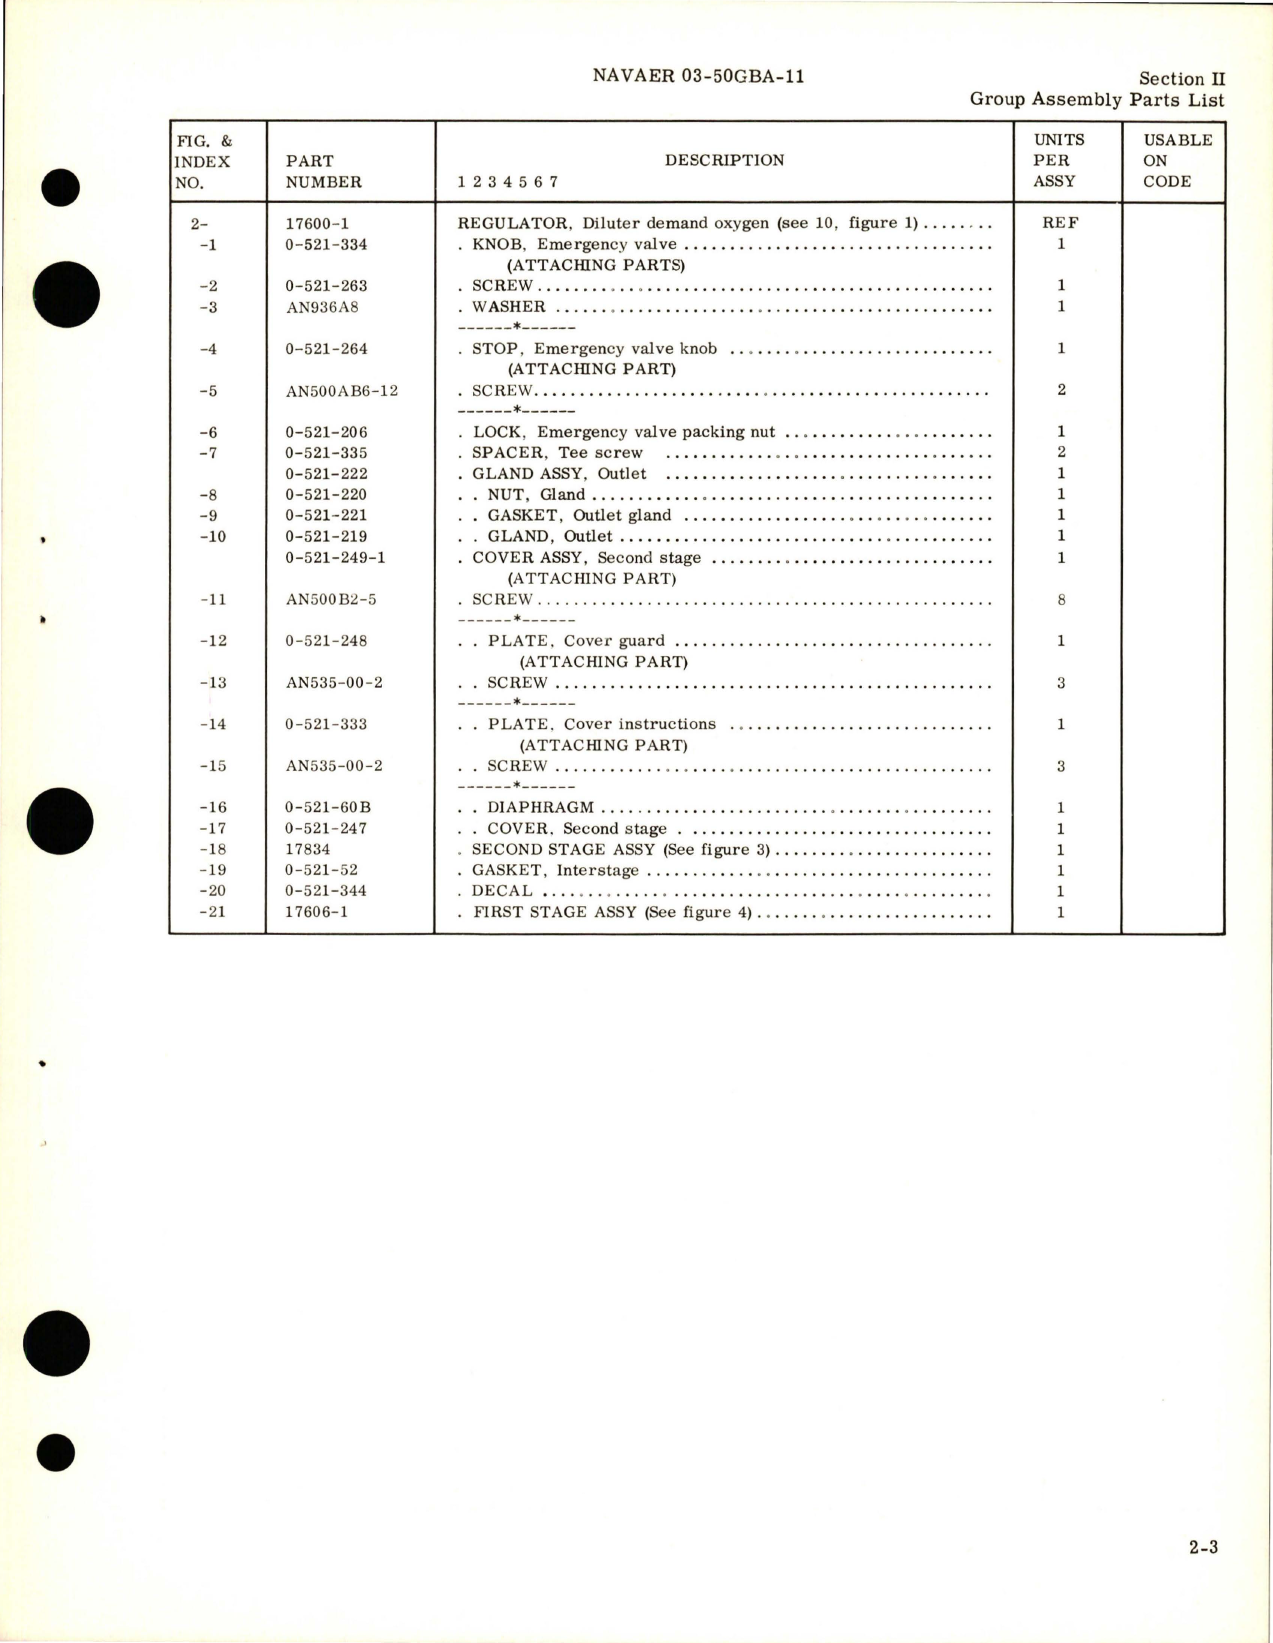 Sample page 7 from AirCorps Library document: Illustrated Parts Breakdown for Portable High Pressure Oxygen Unit - Part 15425 